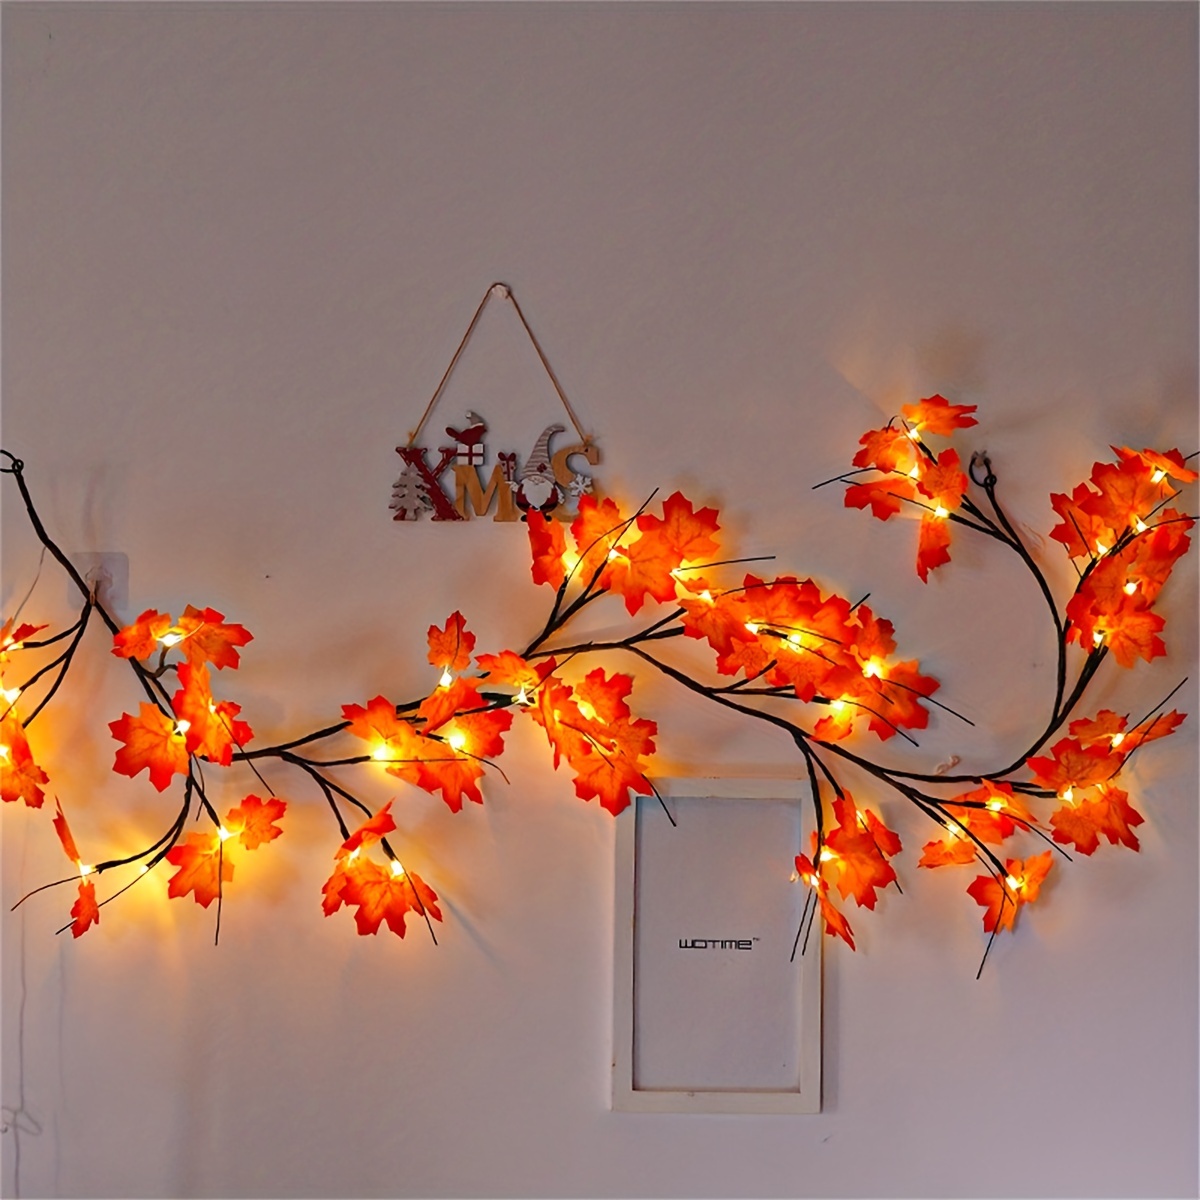 1pc enchanted willow vine lights for home decor christmas decorations flexible diy indoor artificial plants tree branches 48 leds 1 7m 5 58ft maple leaf willow vine lights for walls bedroom living room decor halloween thanksgiving details 3